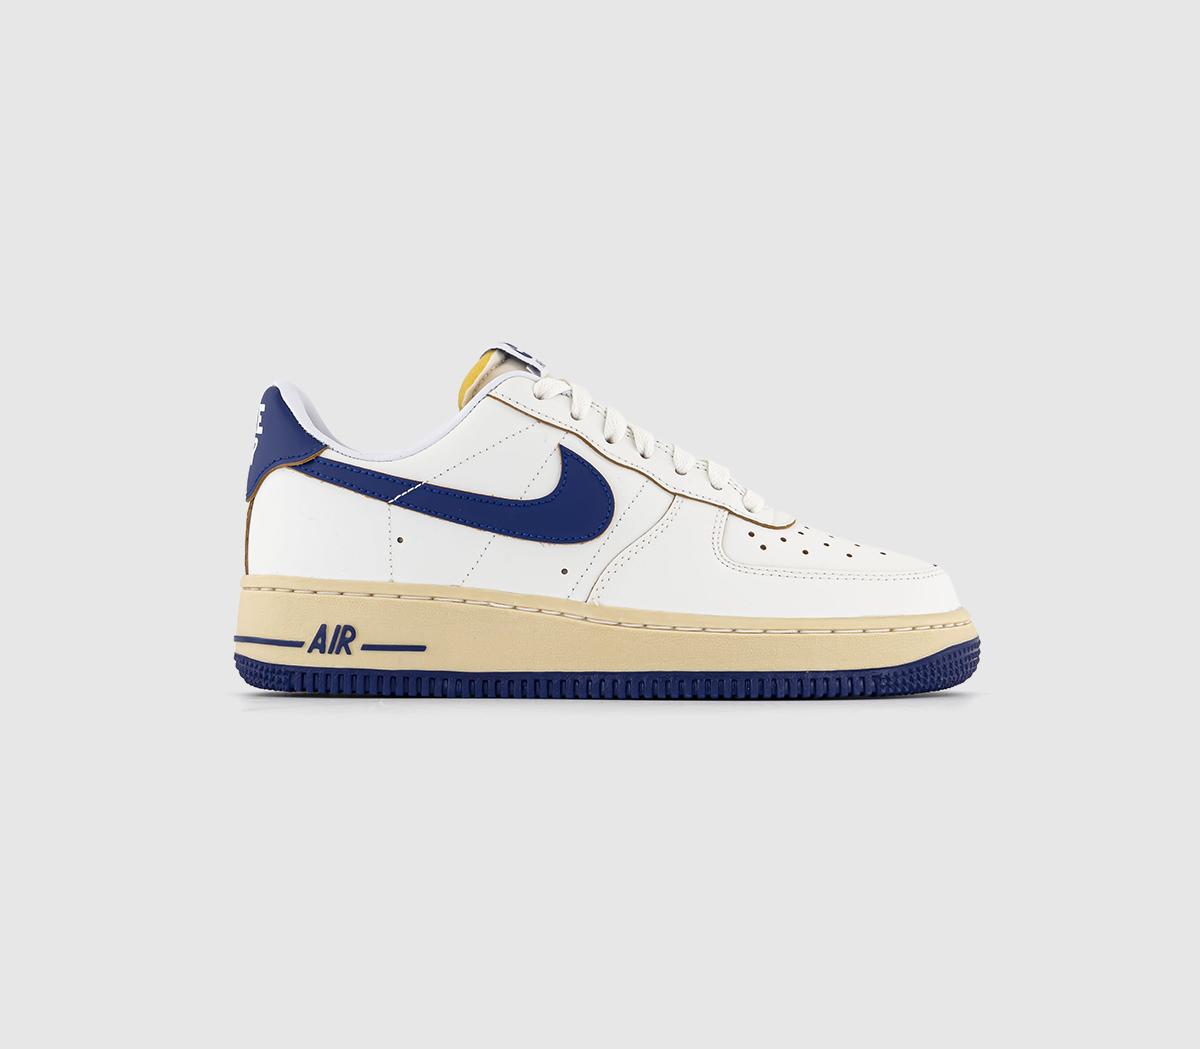 Nike Womens Air Force 1 07 Trainers Sail Deep Royal Blue Pale Vanilla Gold Suede White, 6.5